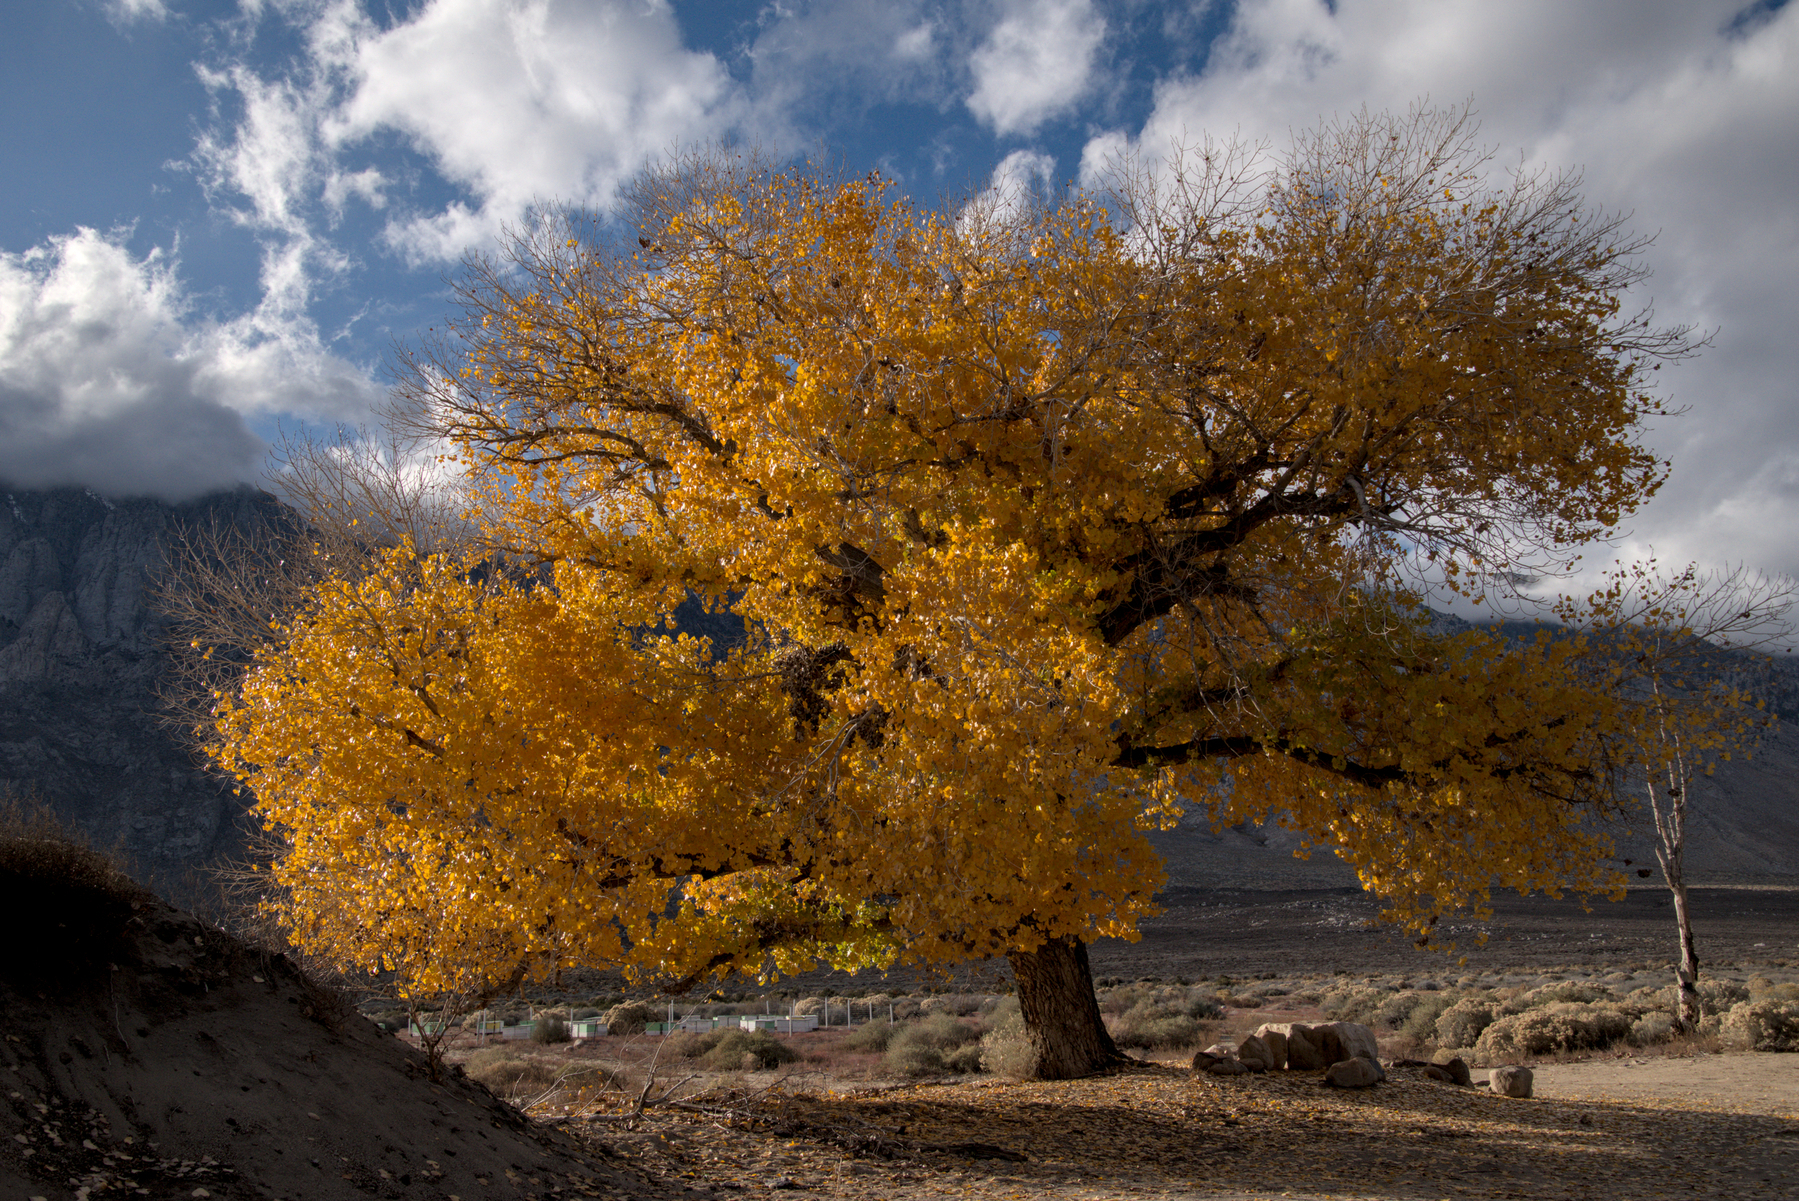 A large Cottonwood tree, its leaves all yellow-orange, some fallen on the ground, fills the frame. It grows amid high-desert sagebrush. High mountains can be seen in the distance.  The sky is blue with puffy white clouds.